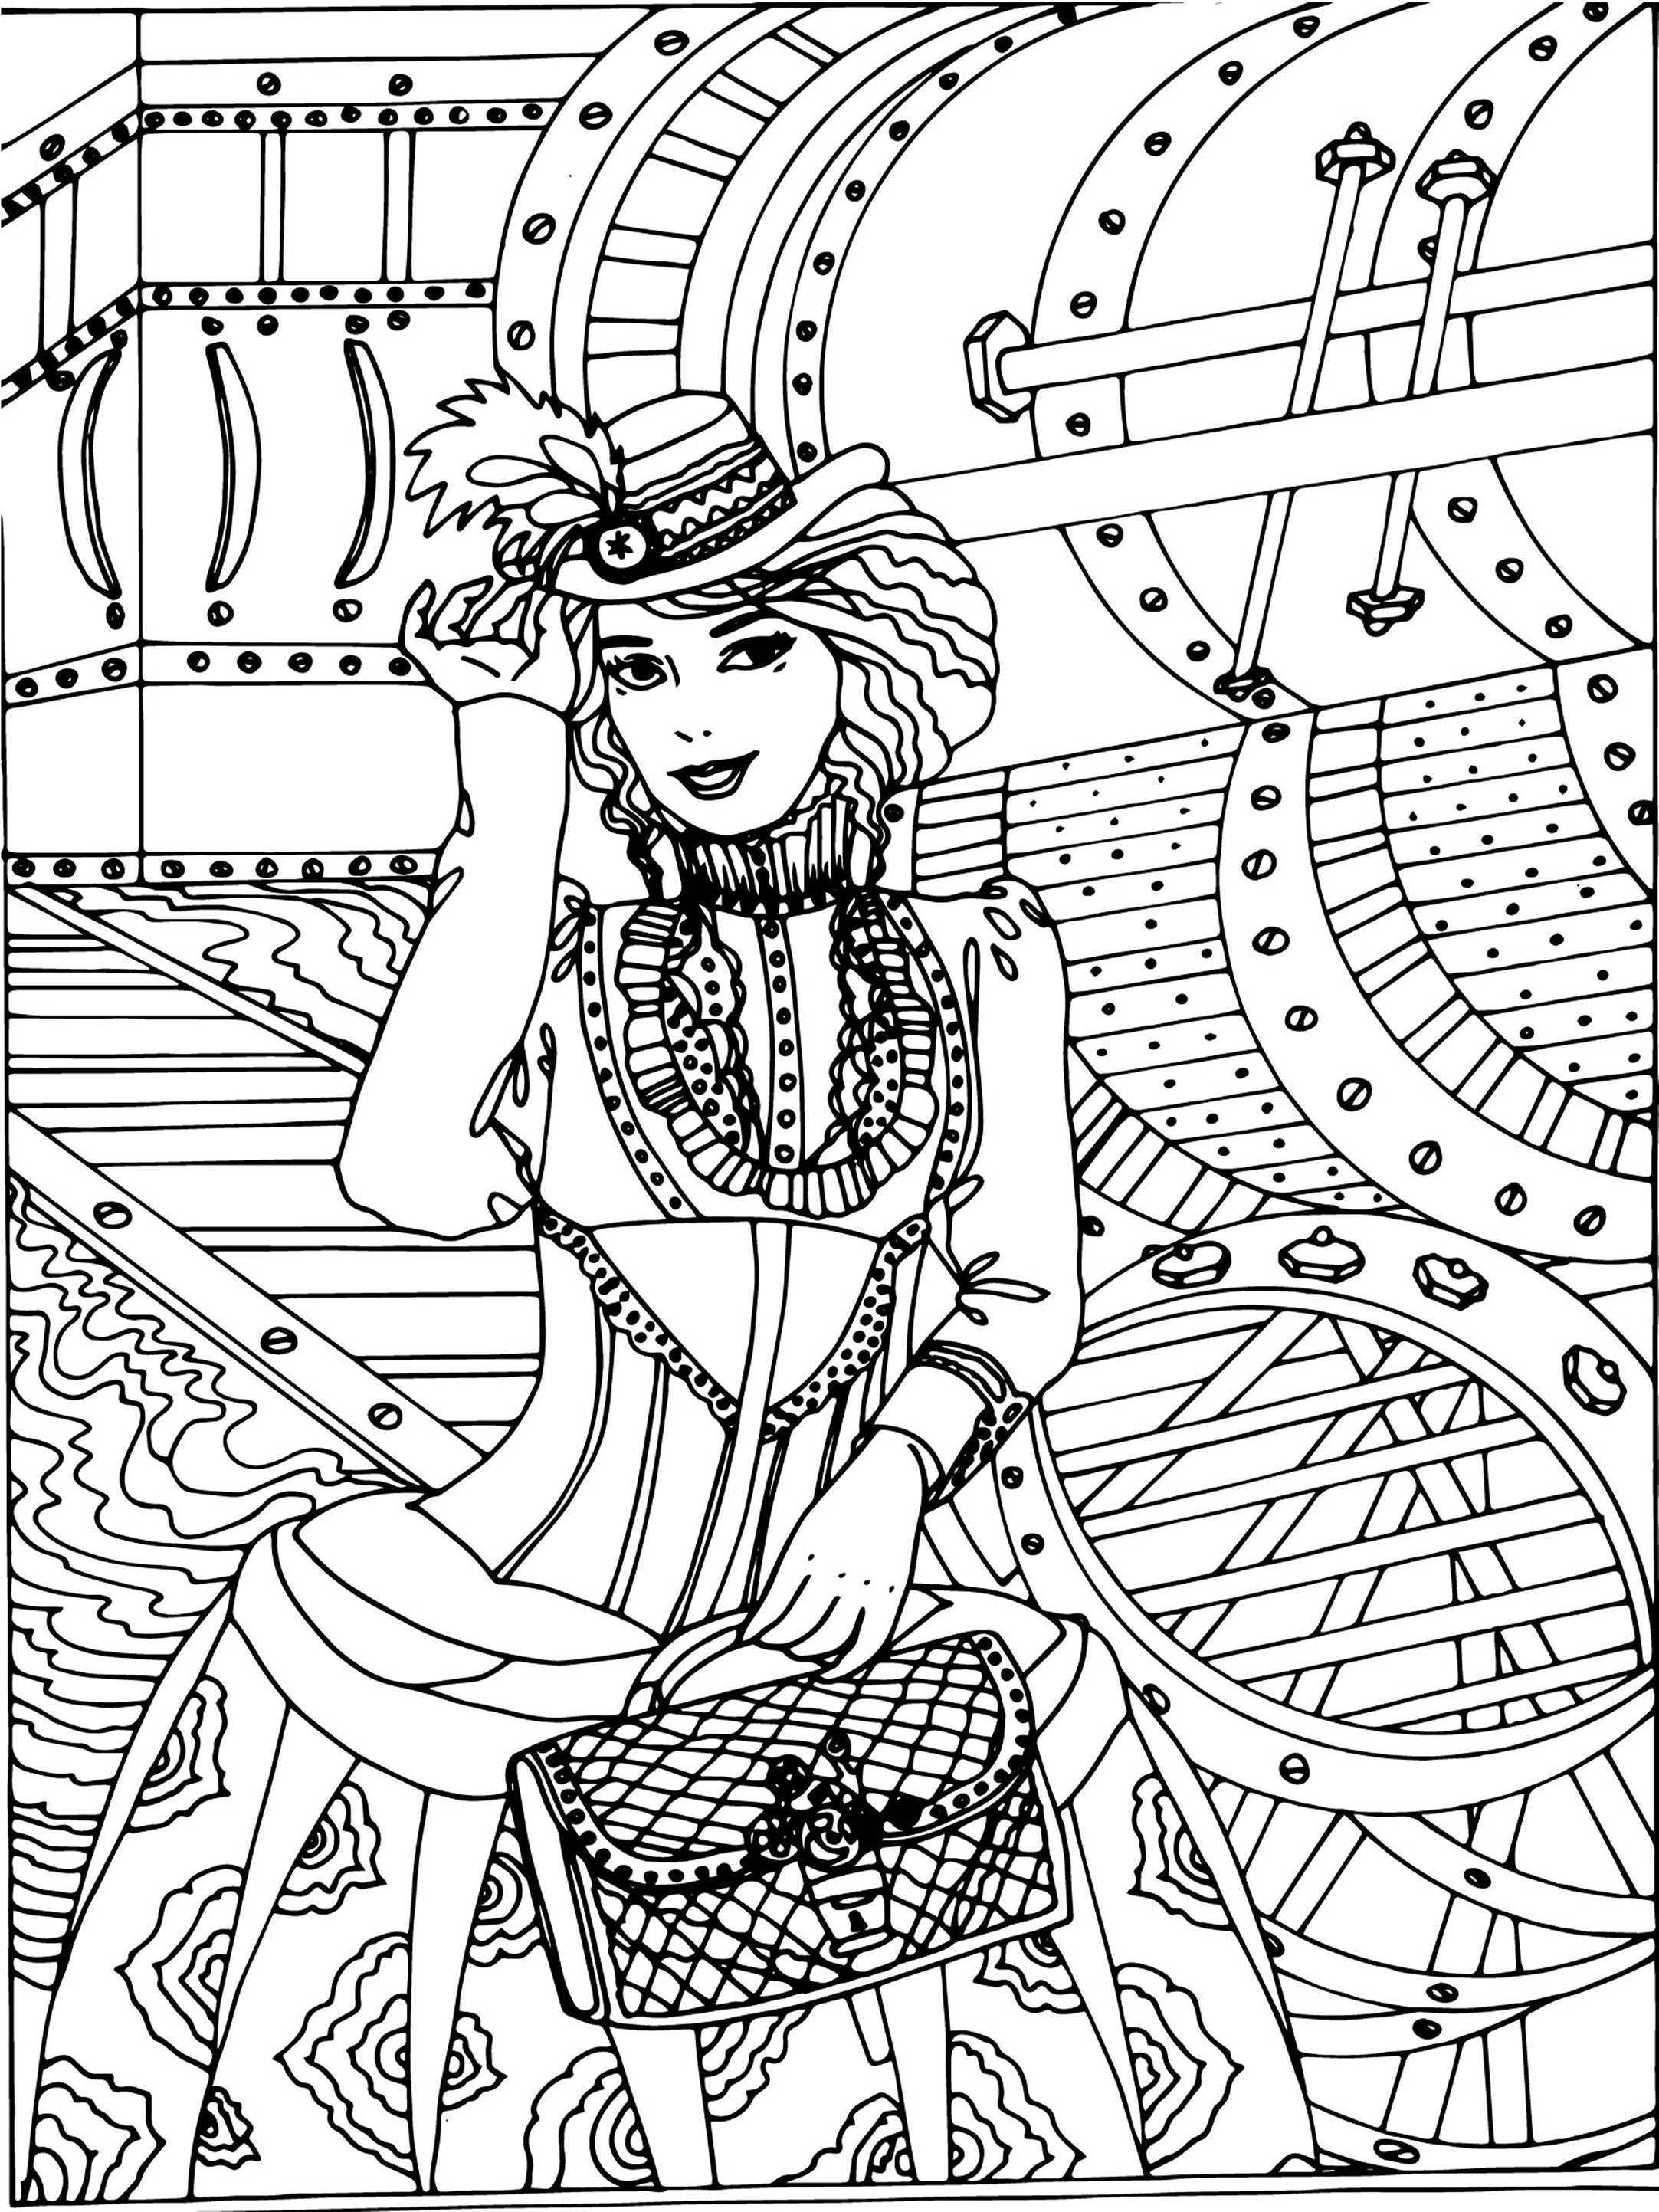 World Women Coloring Book For Adults: Self-Care and Mindfulness Art:  Unleashing Creativity: Coloring Book for Women to Express Themselves -  ArtPhoenix: 9781956968200 - AbeBooks